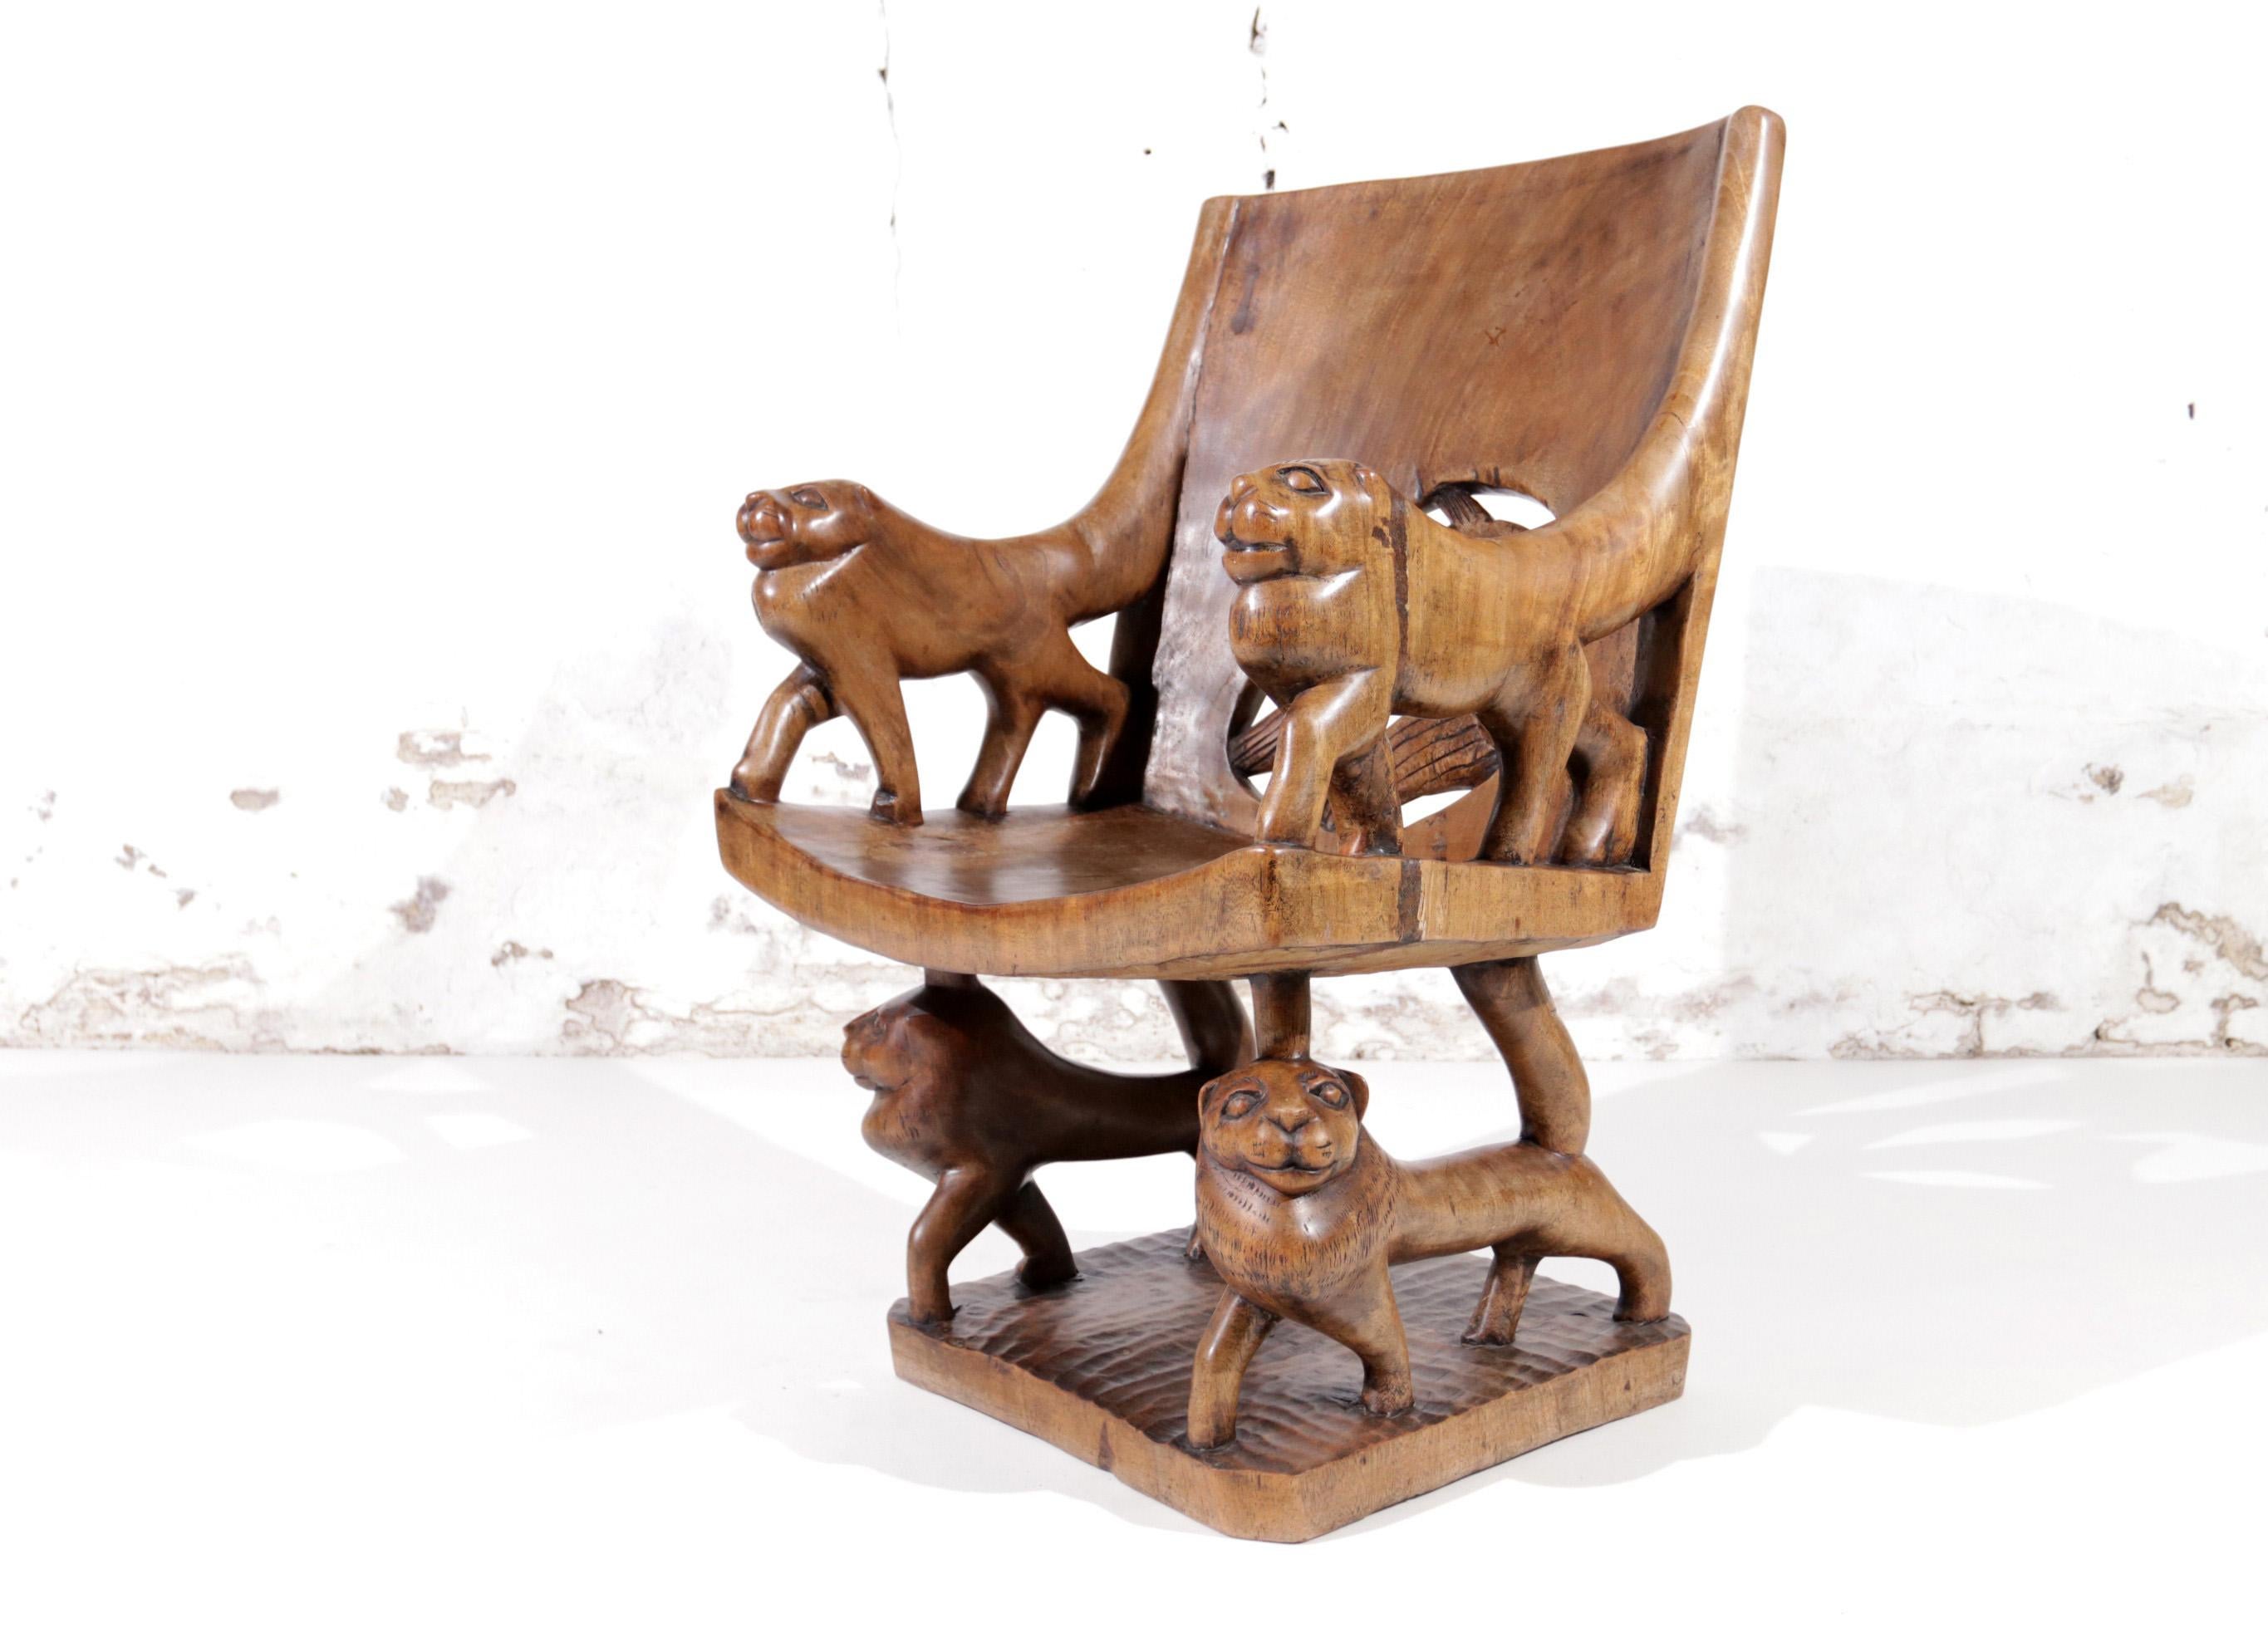 Very exquisite African Sculptural Lion throne made from 1 piece of solid (probably teak) wooden trunk that must have had a circumference of more than 1.5 meters.
We also have the other chair from the same tree trunk and these chairs probably